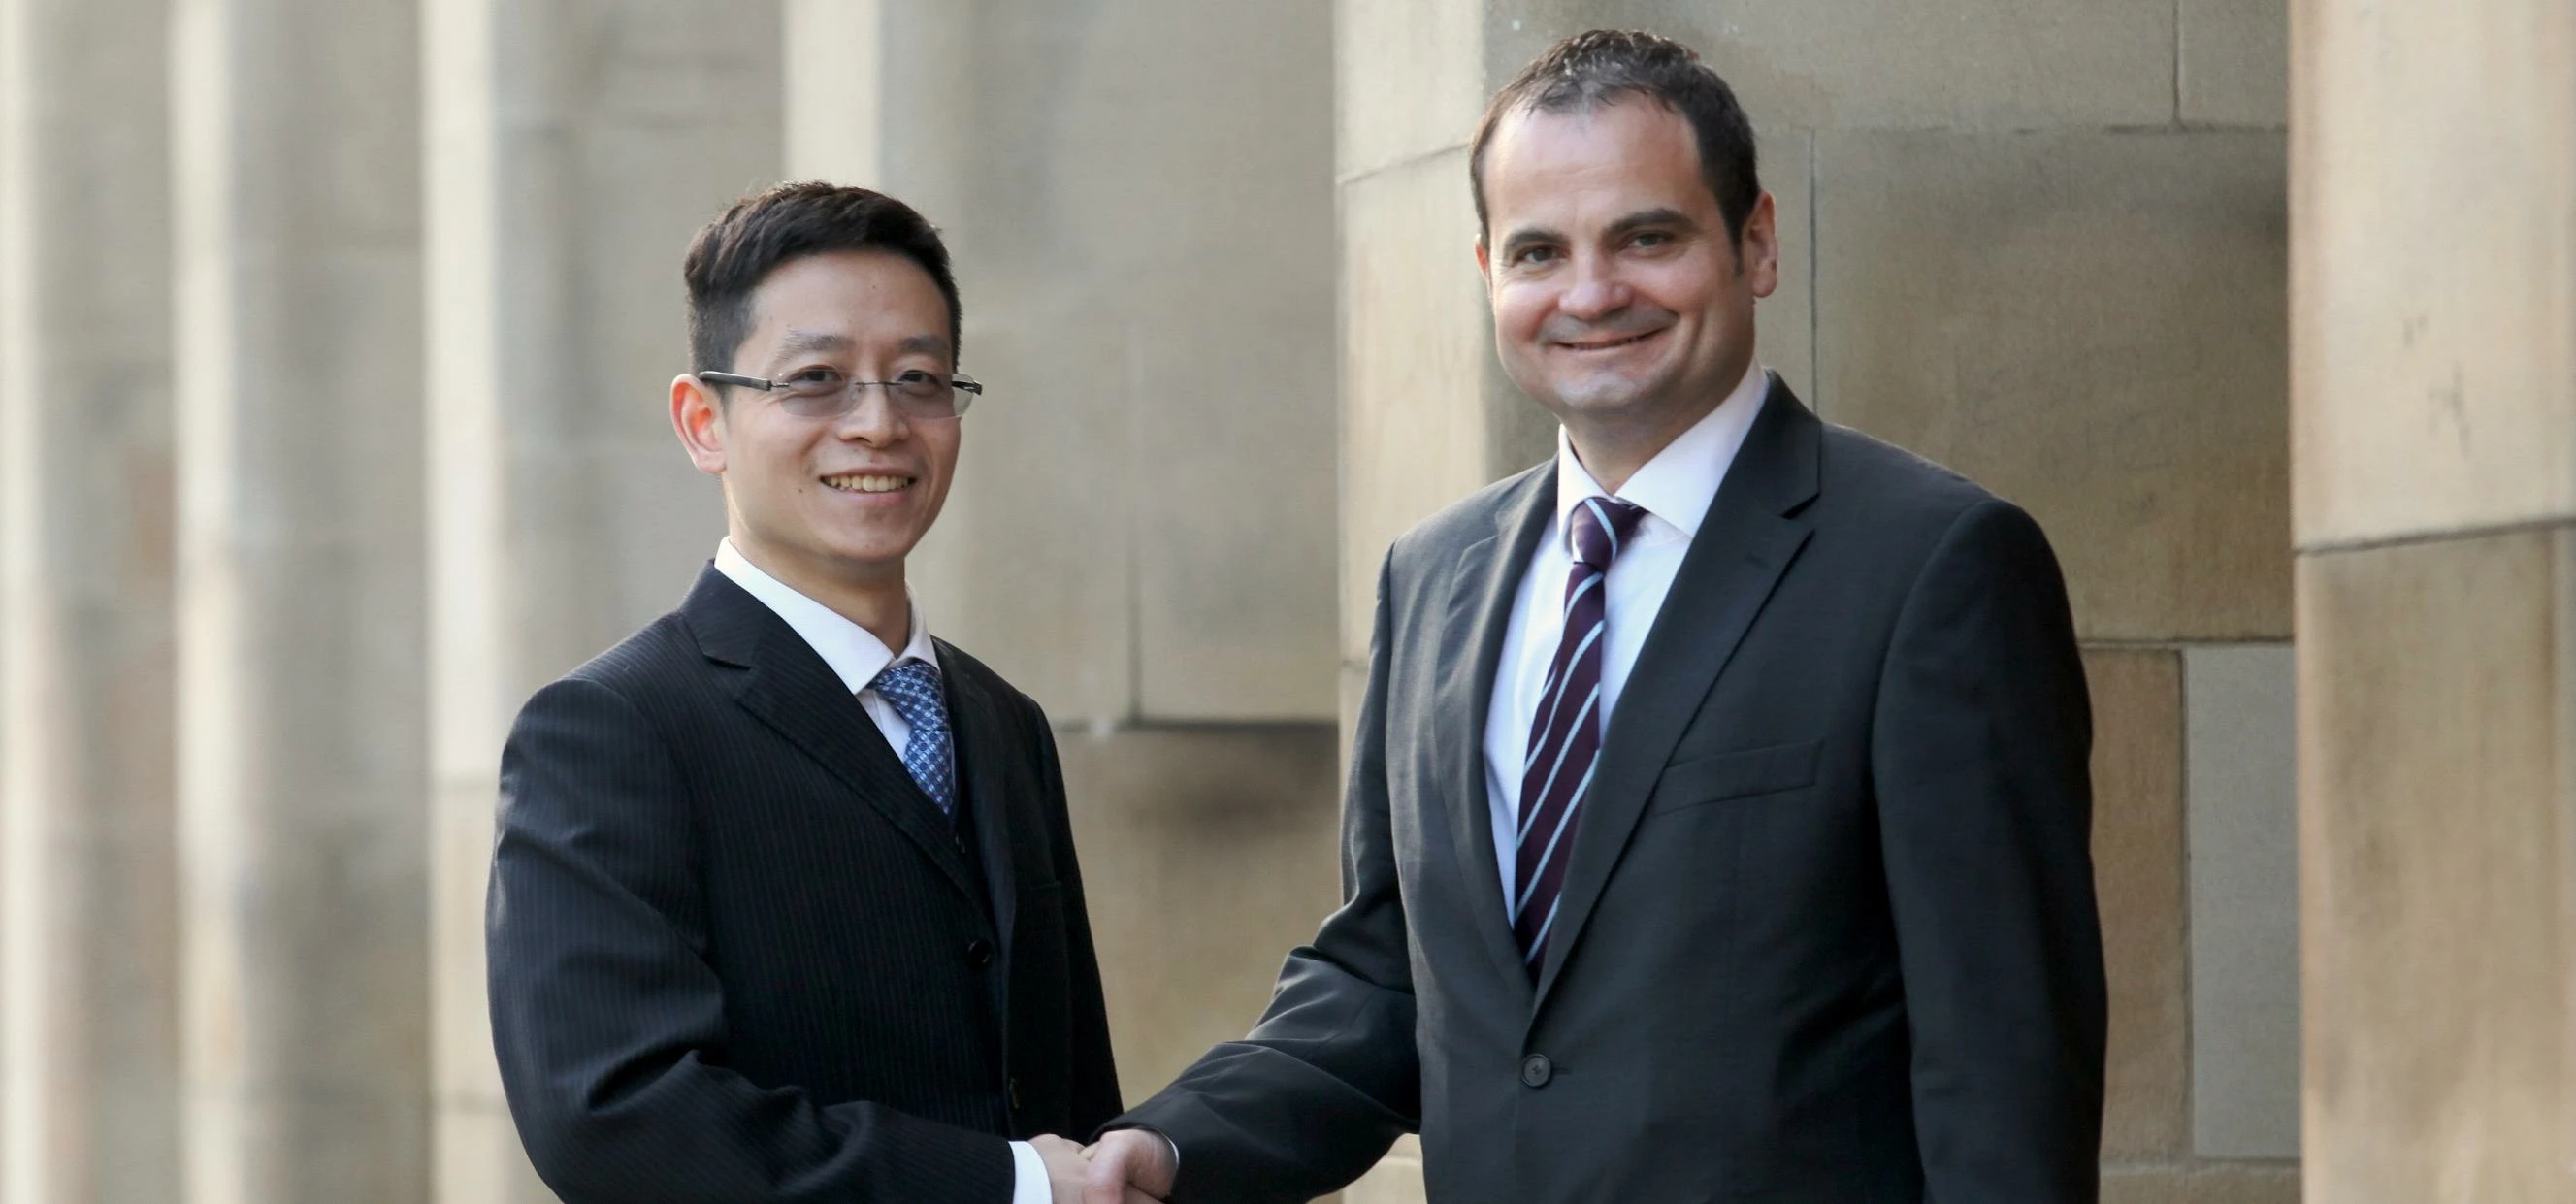 Jinstar's Steve Yang (left) with Michael Purcell of Manchester & Cheshire Construction